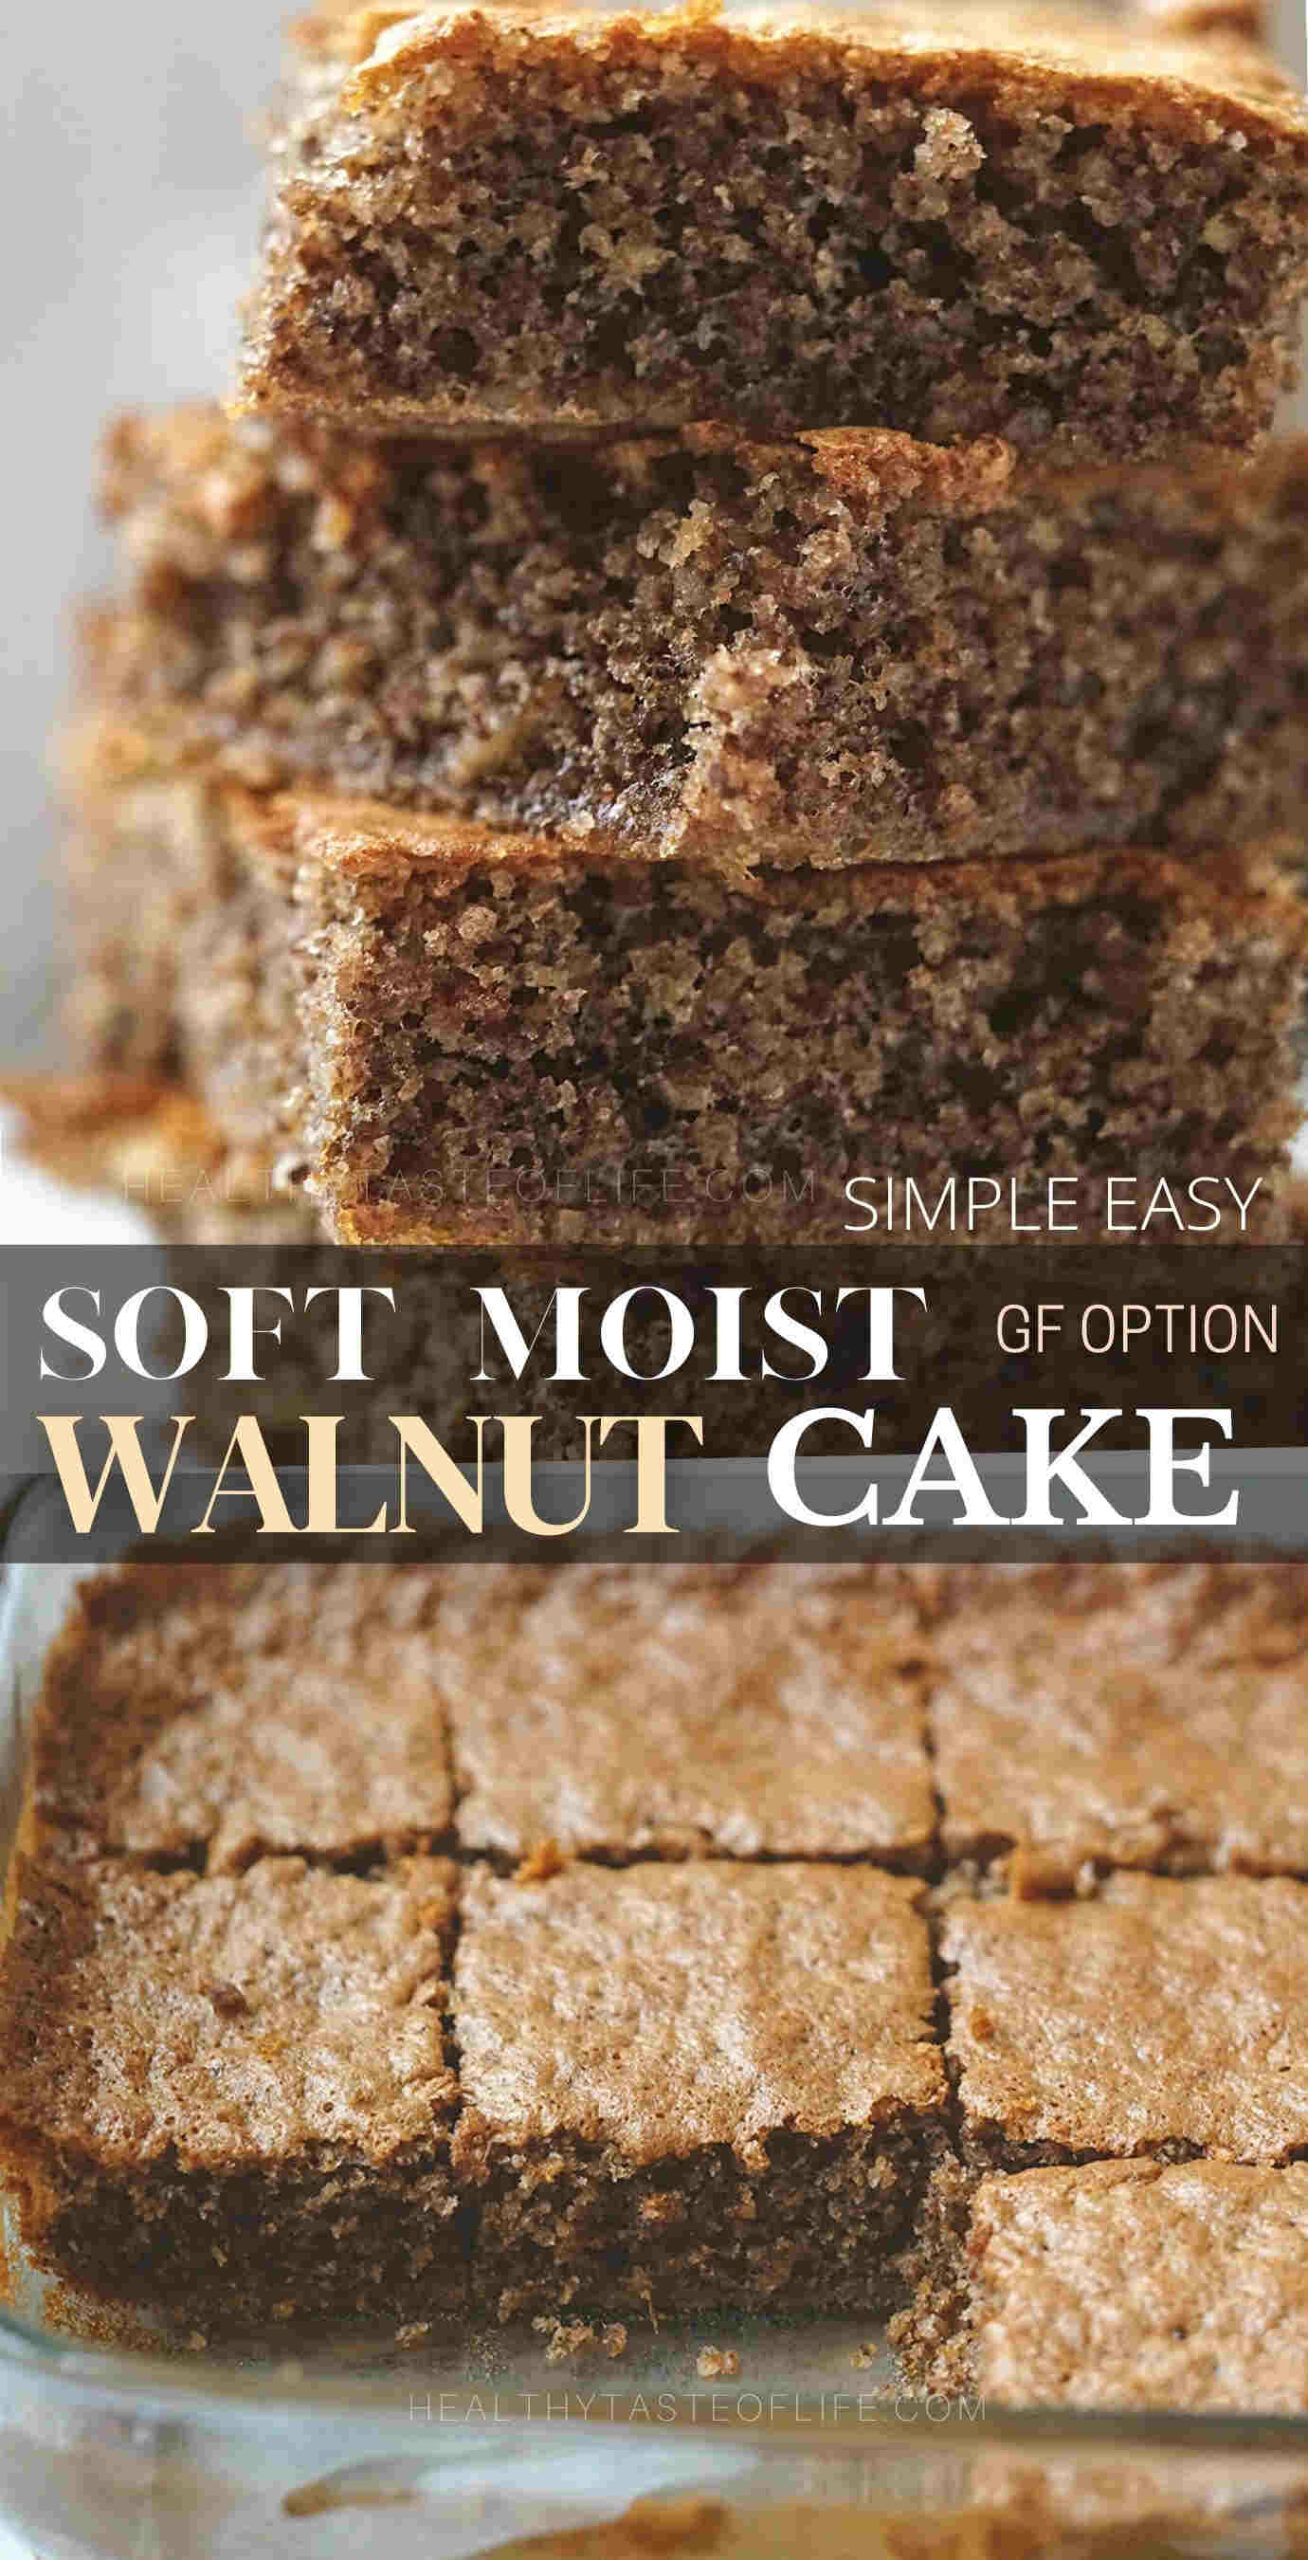 This walnut cake recipe yields a moist and fluffy texture similar to a walnut sponge cake. Easily made in a sheet pan this walnut coffee cake can be enjoyed as it is or layered with frosting for festive holidays. It’s simple, easy and similar to a Greek walnut cake called “karidopita” and can easily be transform into a gluten free walnut cake. #walnutcake #walnutcoffeecake #glutenfreewalnutcake #easywalnutcake #sheetcake